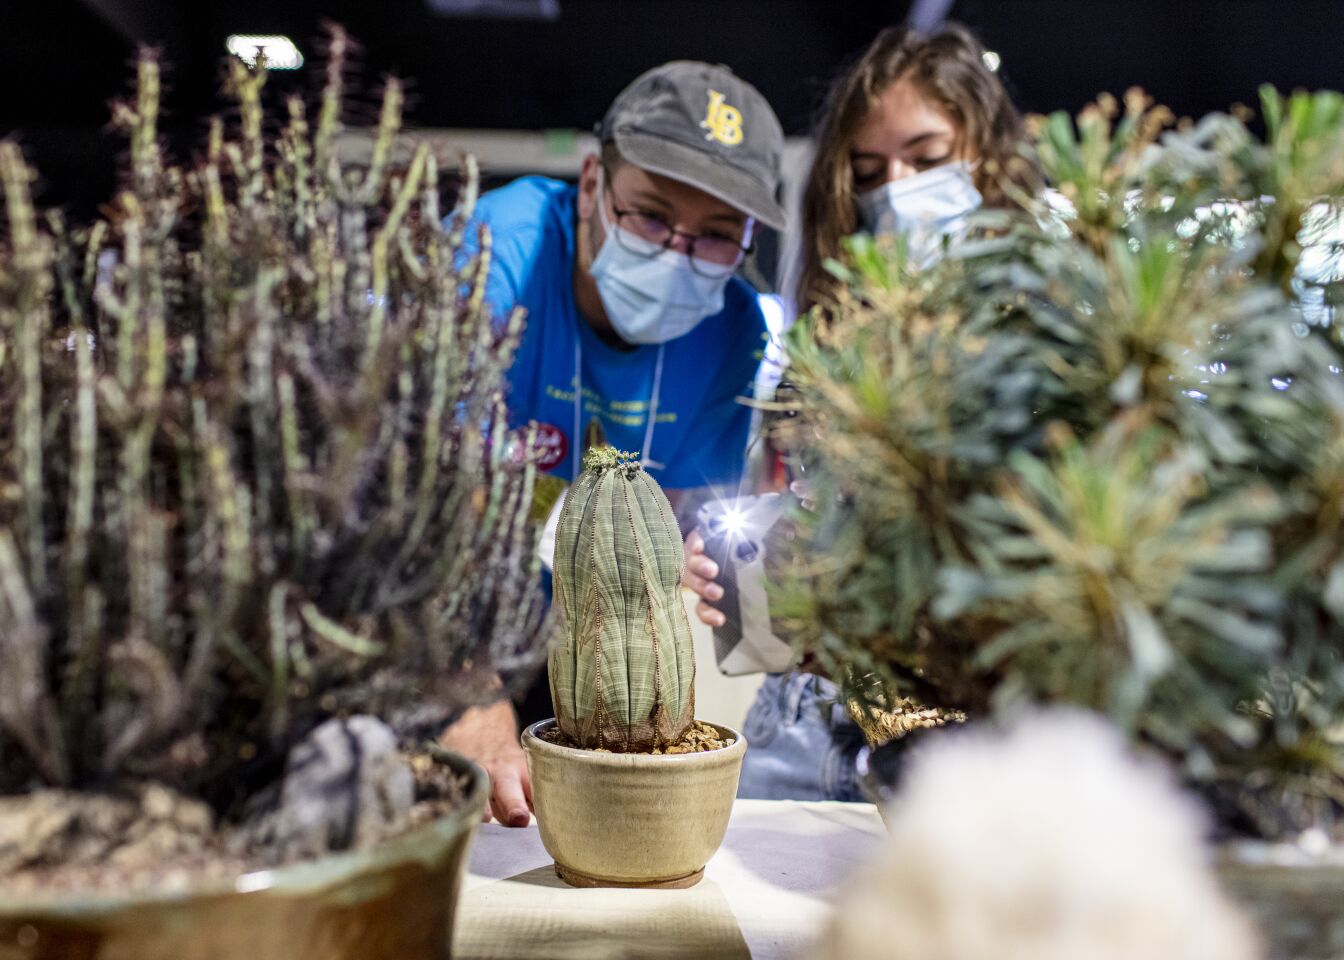 Gavin Hunn, left, and Crystal Eckman of Escondido examine a Euphorbia obesa succulent entered by Louise Stack of Covina, while they record a live stream for the convention's Instagram page, @intercityshow